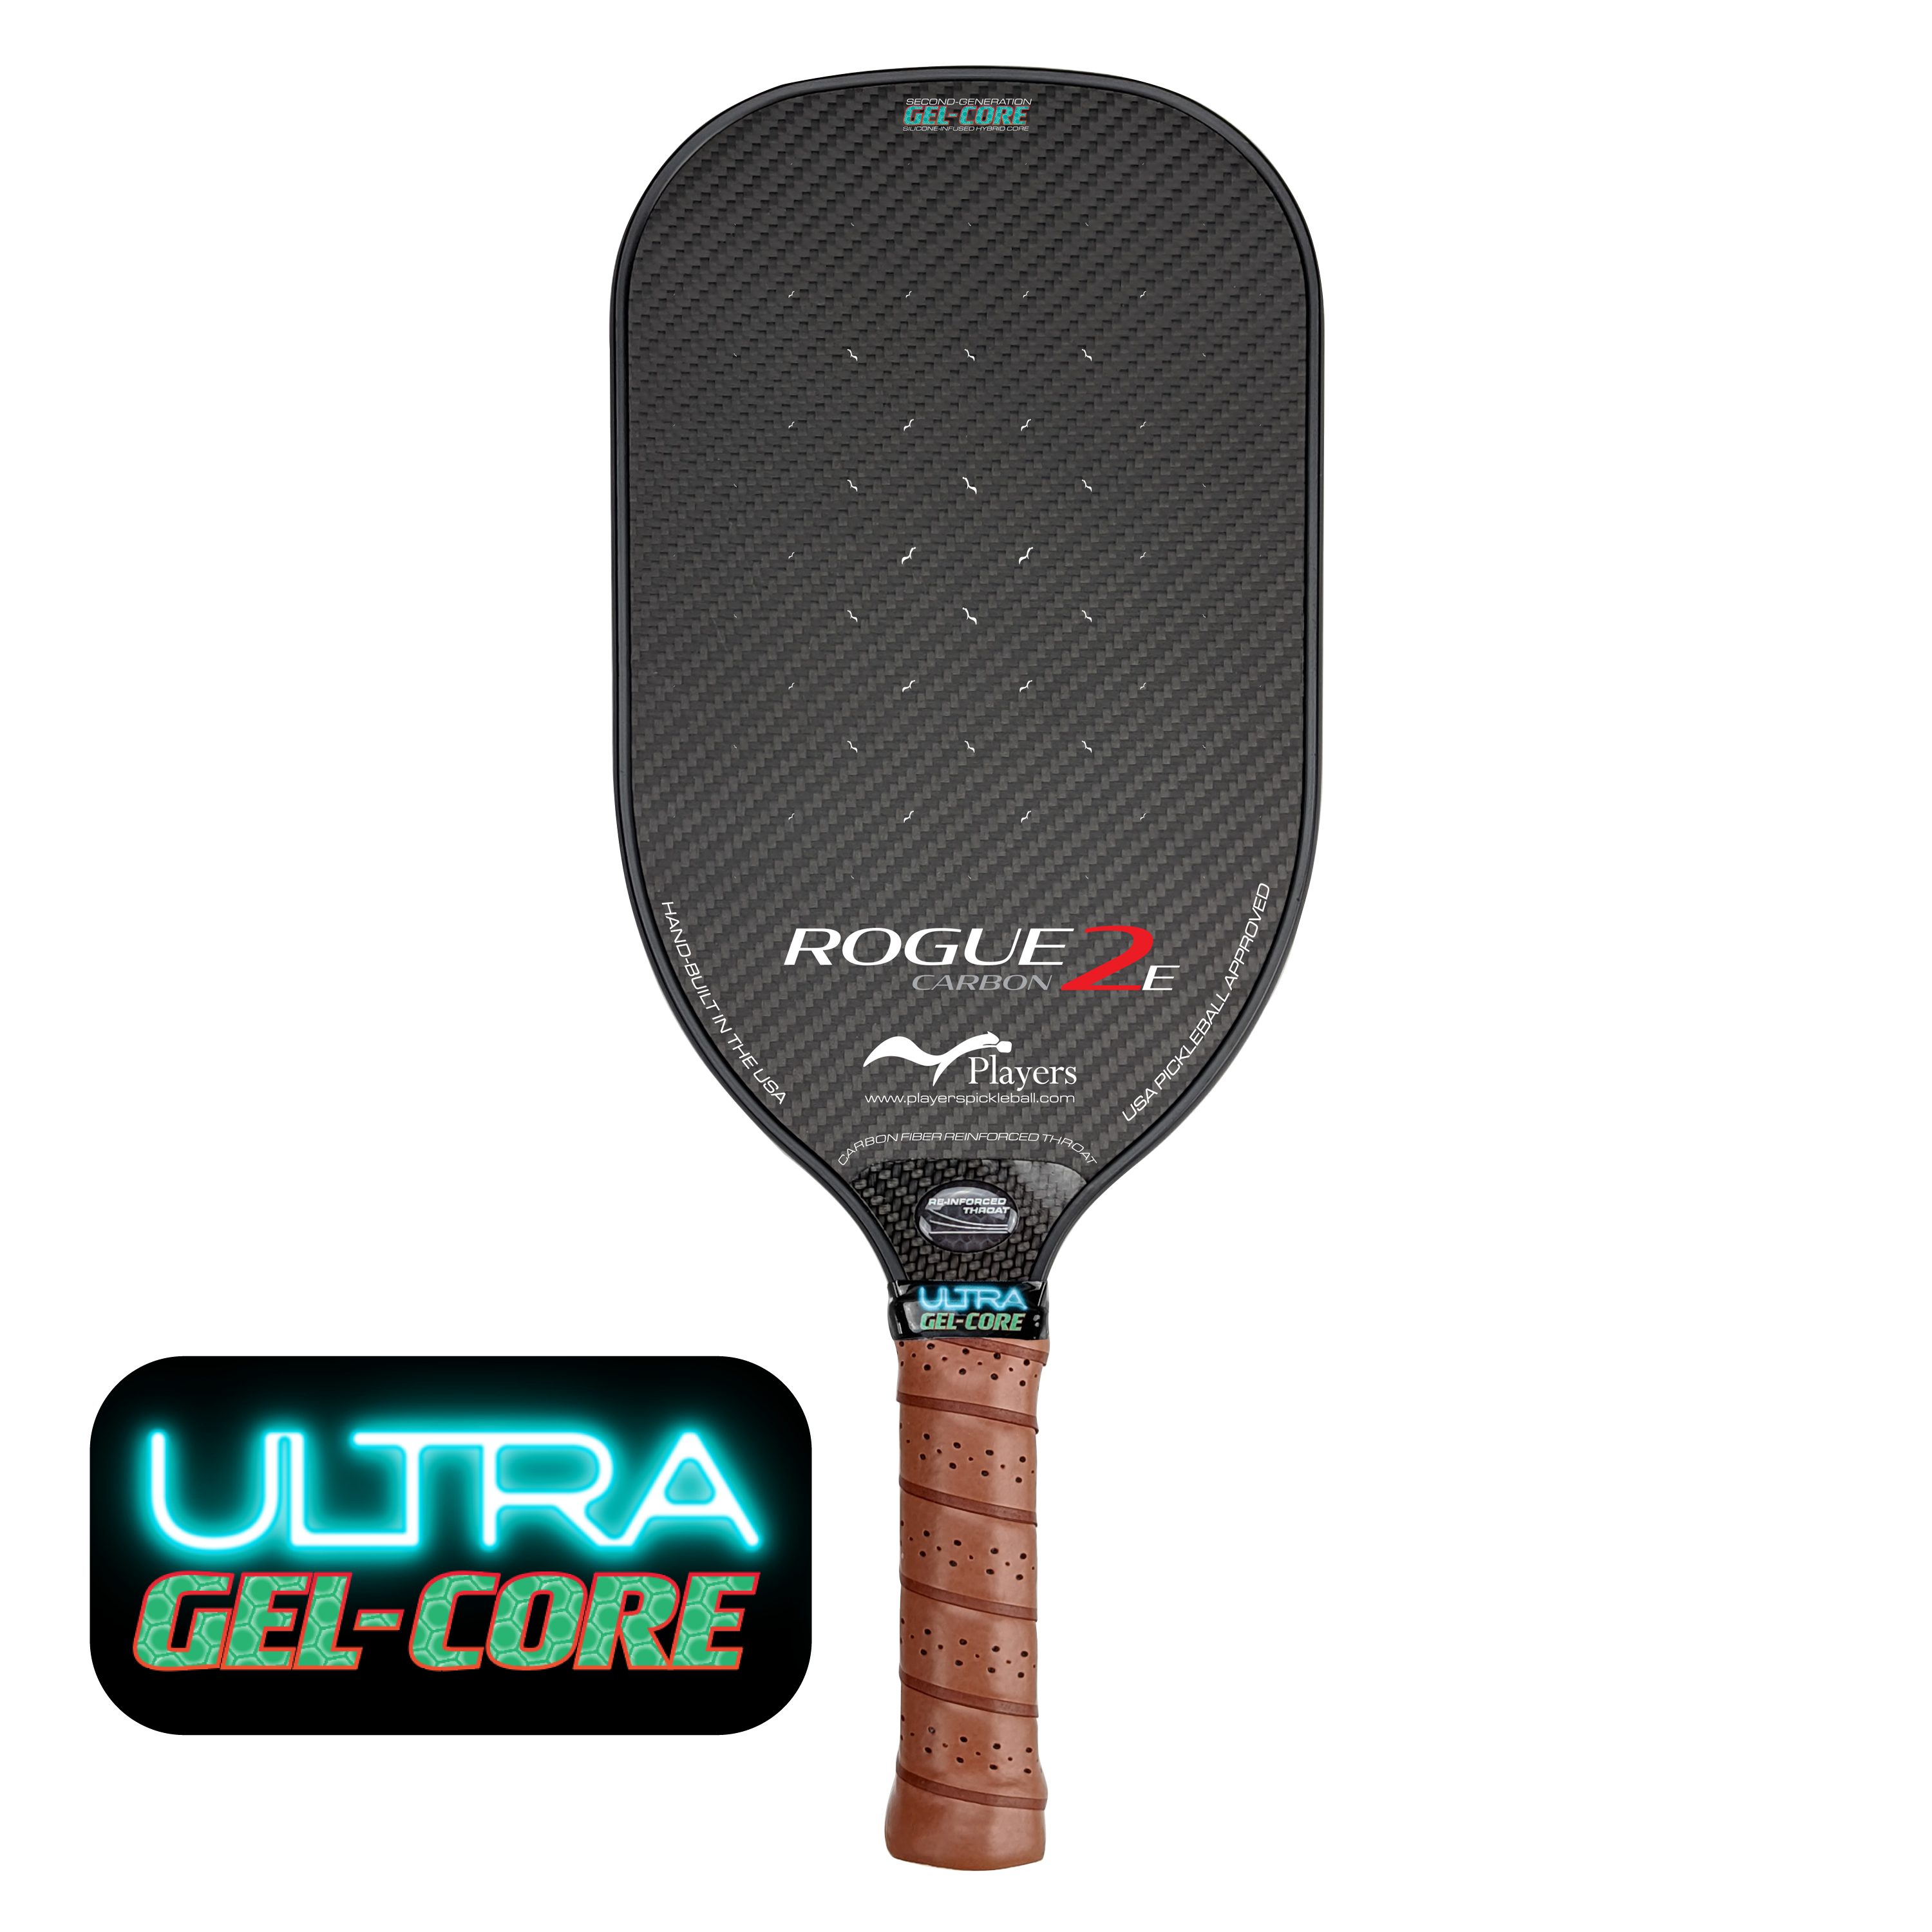 Rogue2E Carbon (Elongated Shape) ULTRA Gel-Core (Cosmetic Blemish Clearance!)